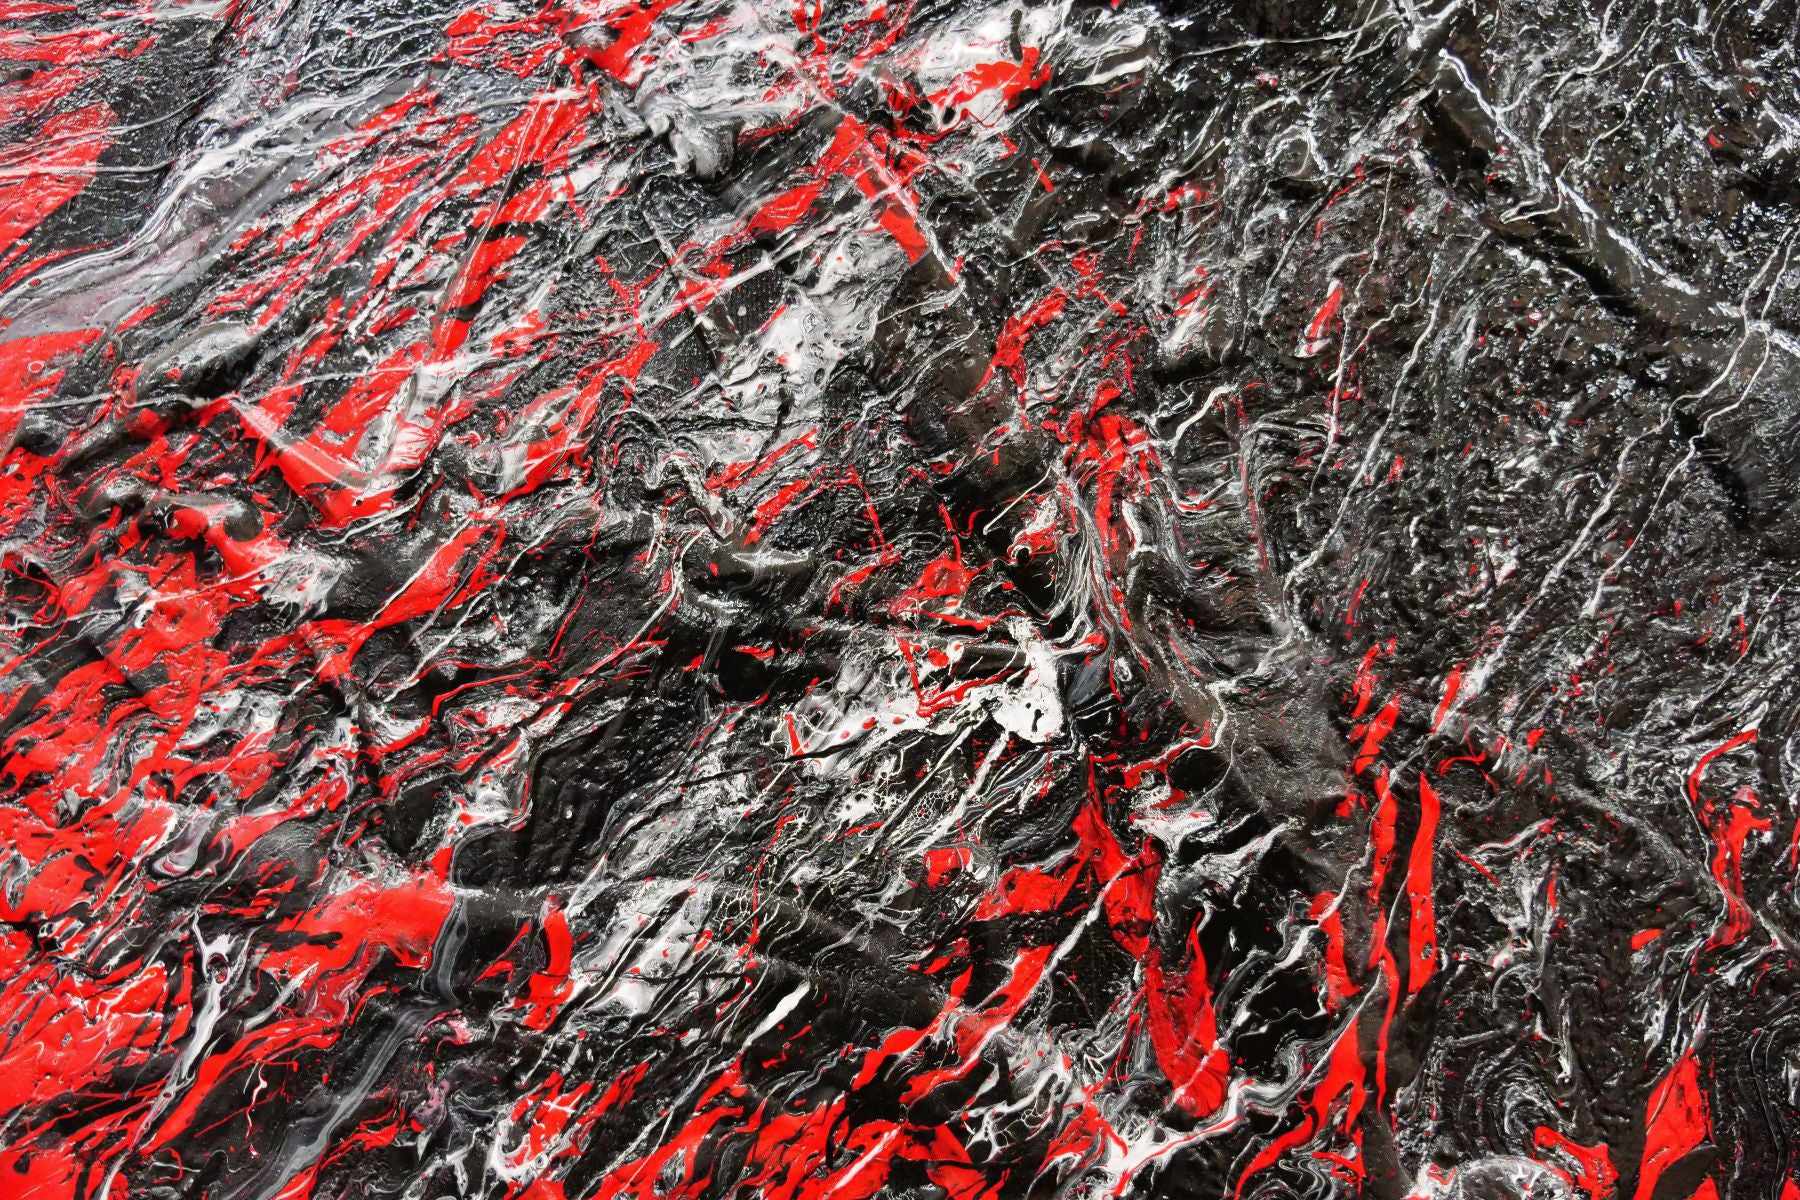 Orgasmic 120cm x 120cm Red Black White Textured Abstract Painting